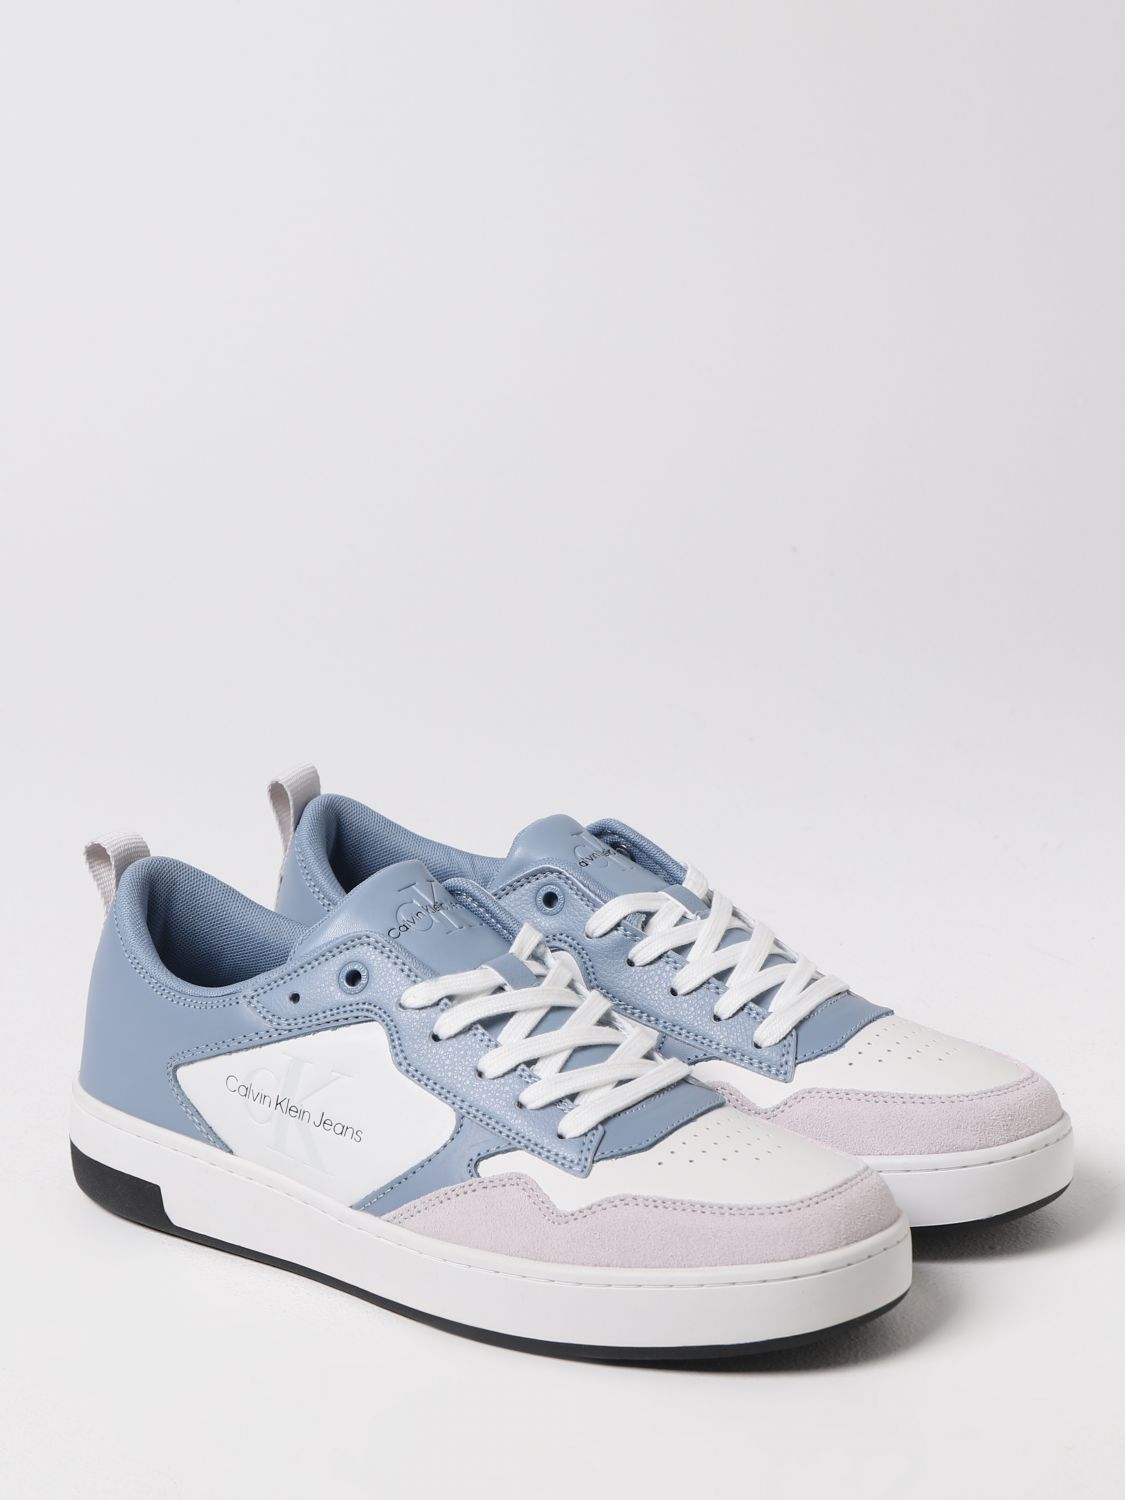 CALVIN KLEIN JEANS: sneakers for man - Gnawed Blue | Calvin Klein Jeans sneakers online GIGLIO.COM